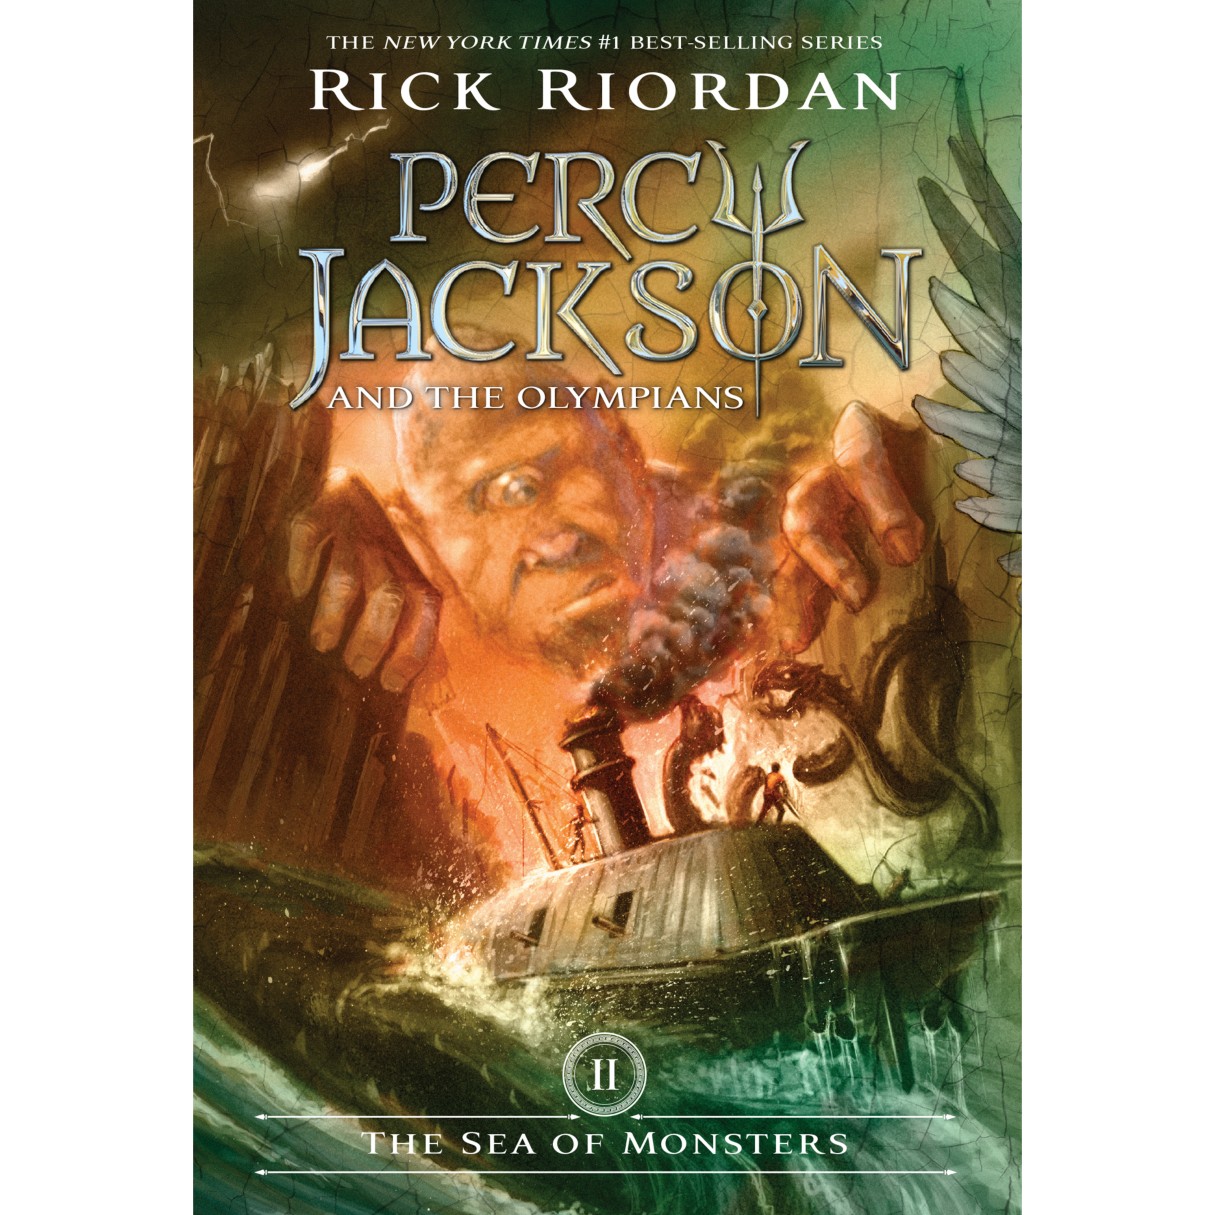 Percy Jackson & the Olympians Book Two: The Sea of Monsters